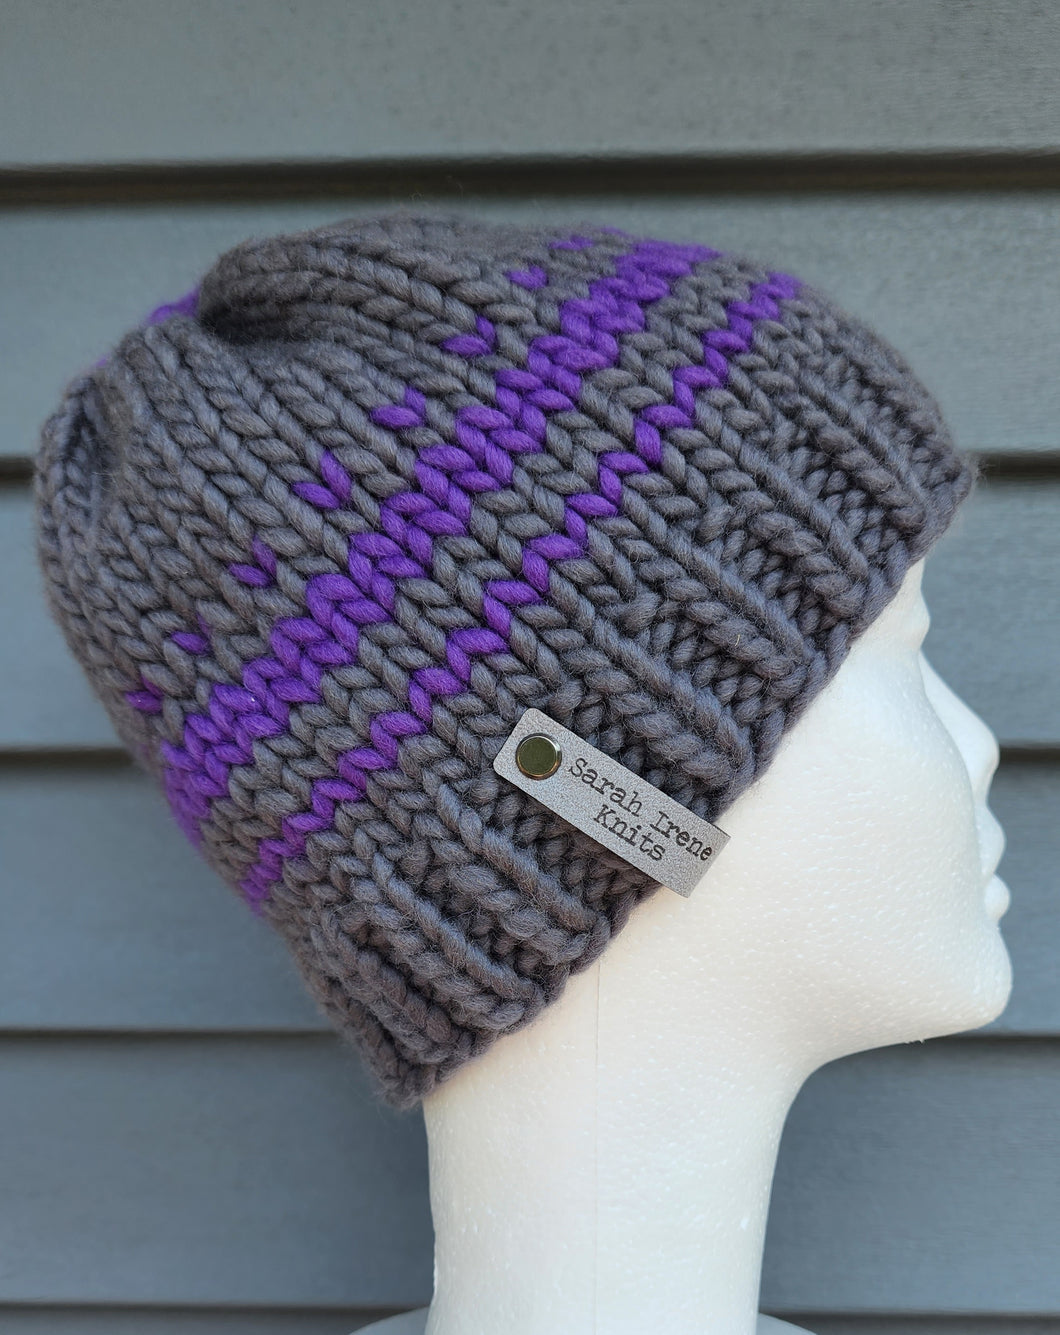 Classic Beanie - Grey with Purple Colorwork - Large